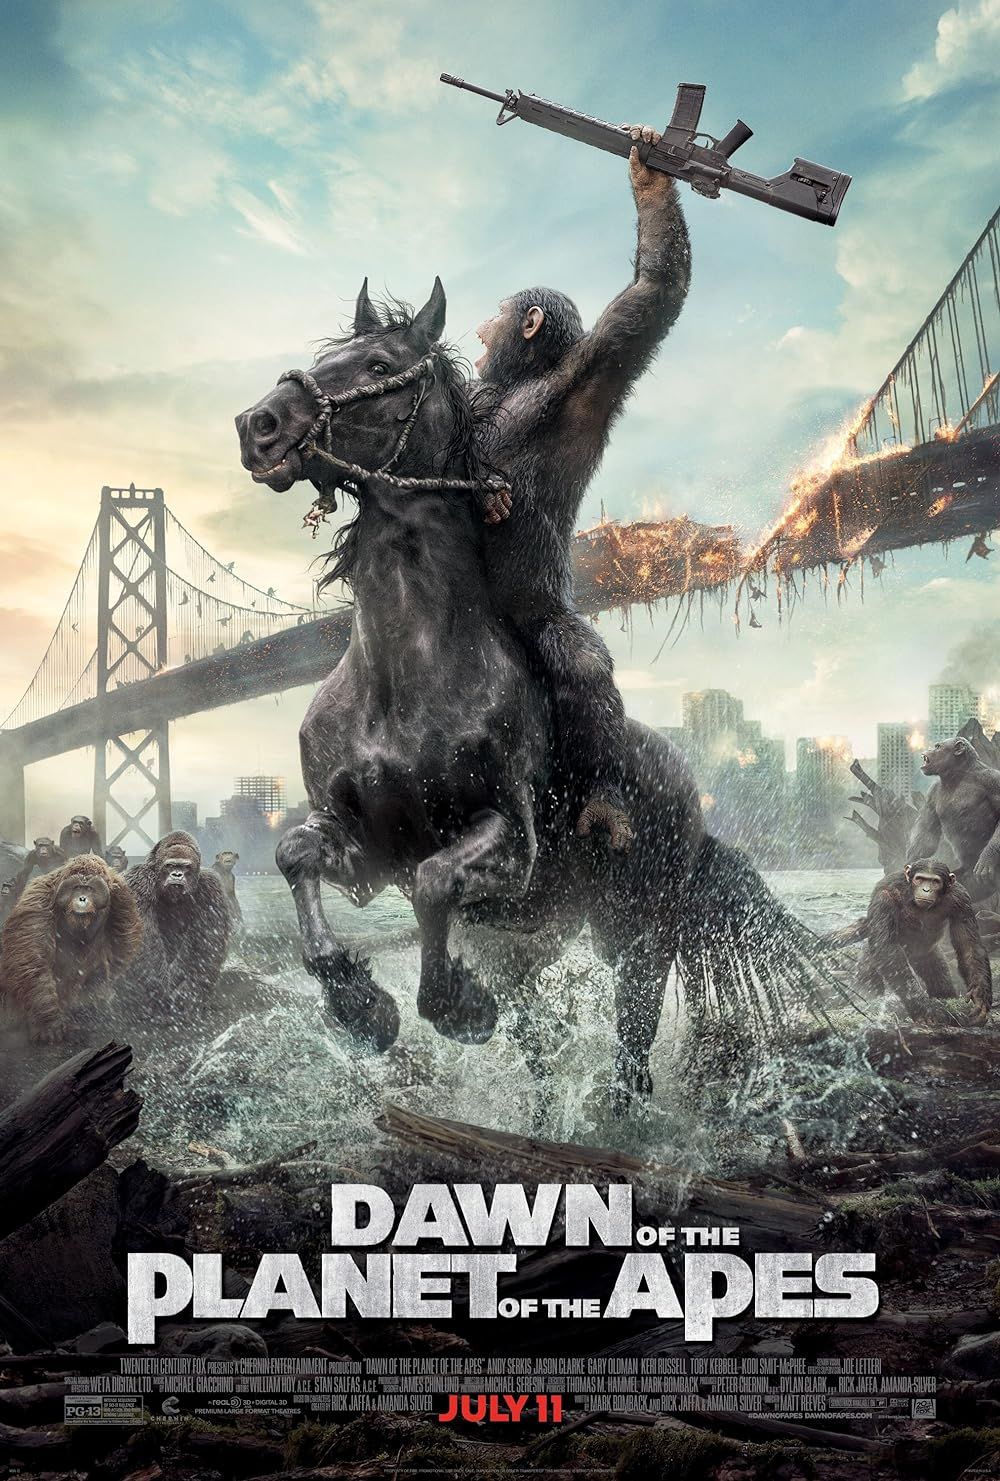 Caesar and other apes on the cover of Dawn of the Planet of the Apes